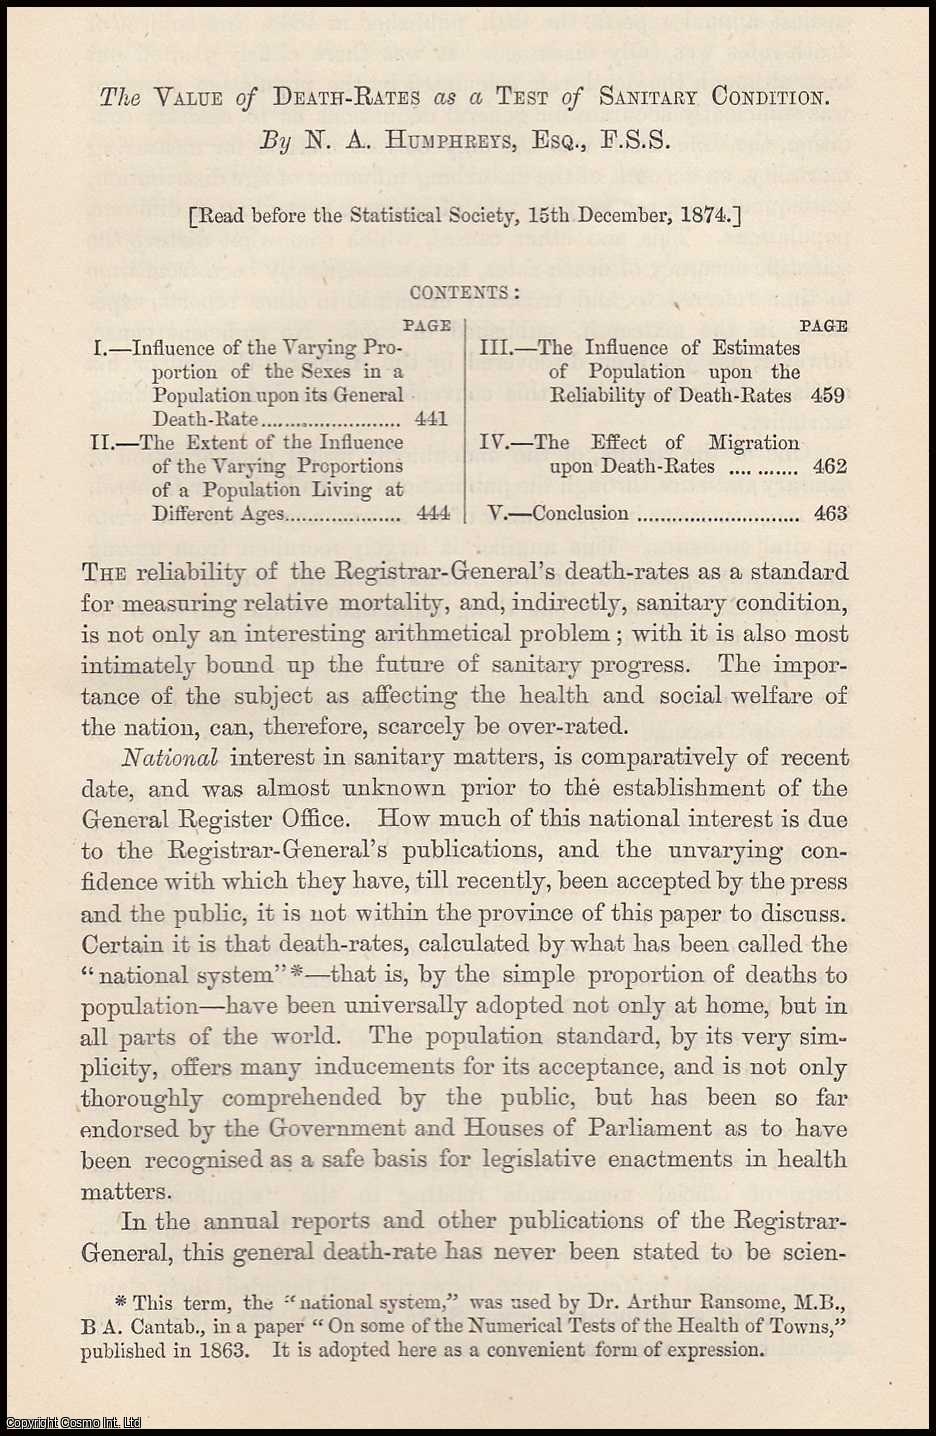 Humphreys, N.A. - The Value of Death-Rates as a Test of Sanitary Conditions. A rare original article from the Journal of the Royal Statistical Society of London, 1874.